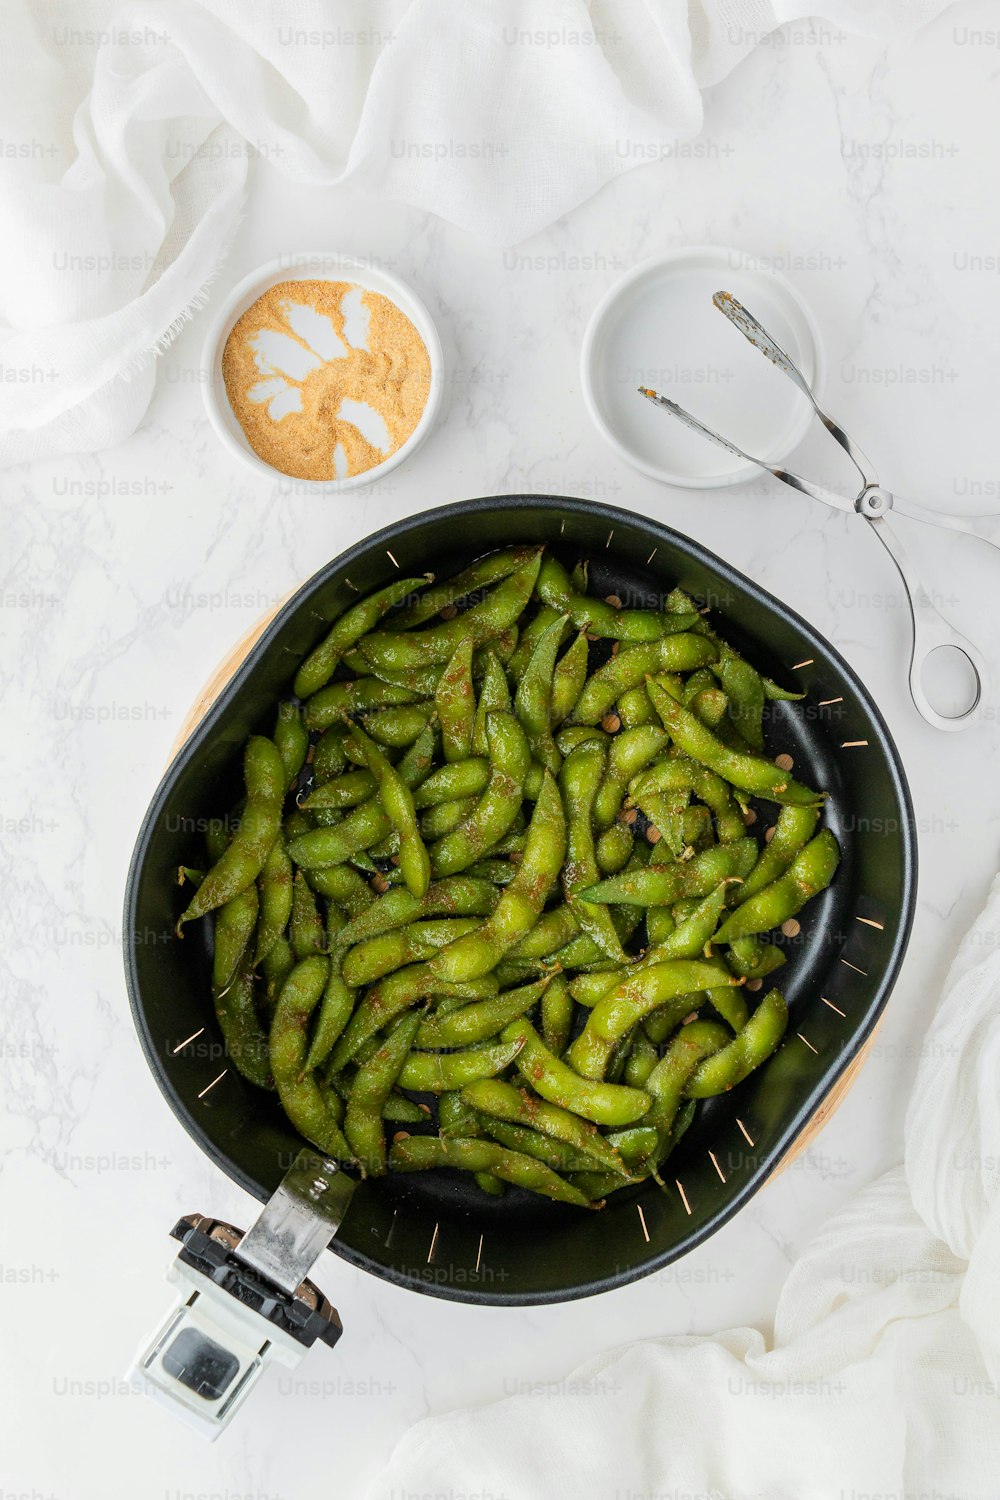 a black bowl filled with green beans next to a camera